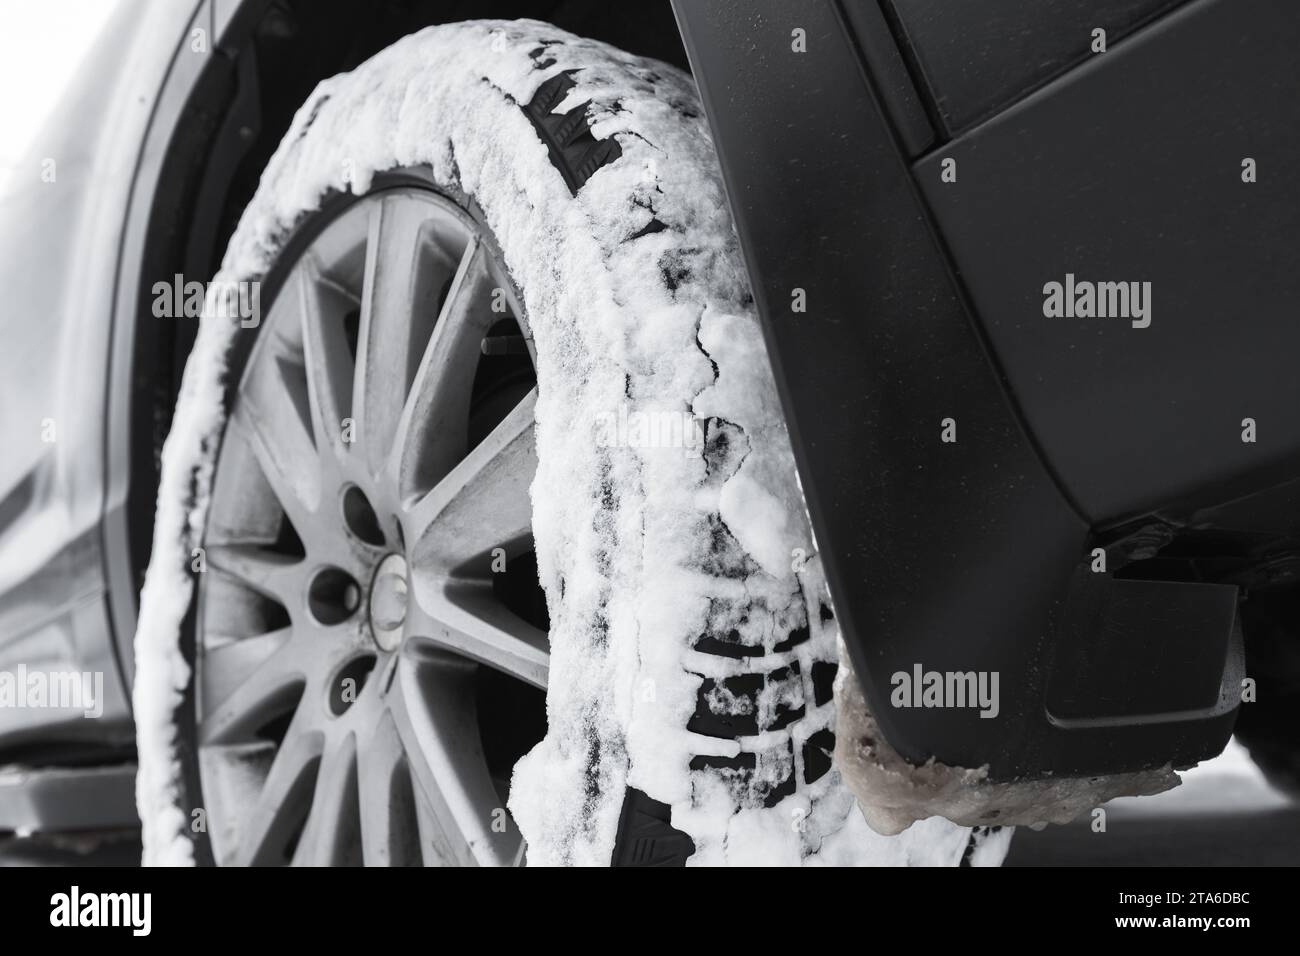 SUV car wheel on snow tire with metal studs. Close-up photo with selective focus Stock Photo